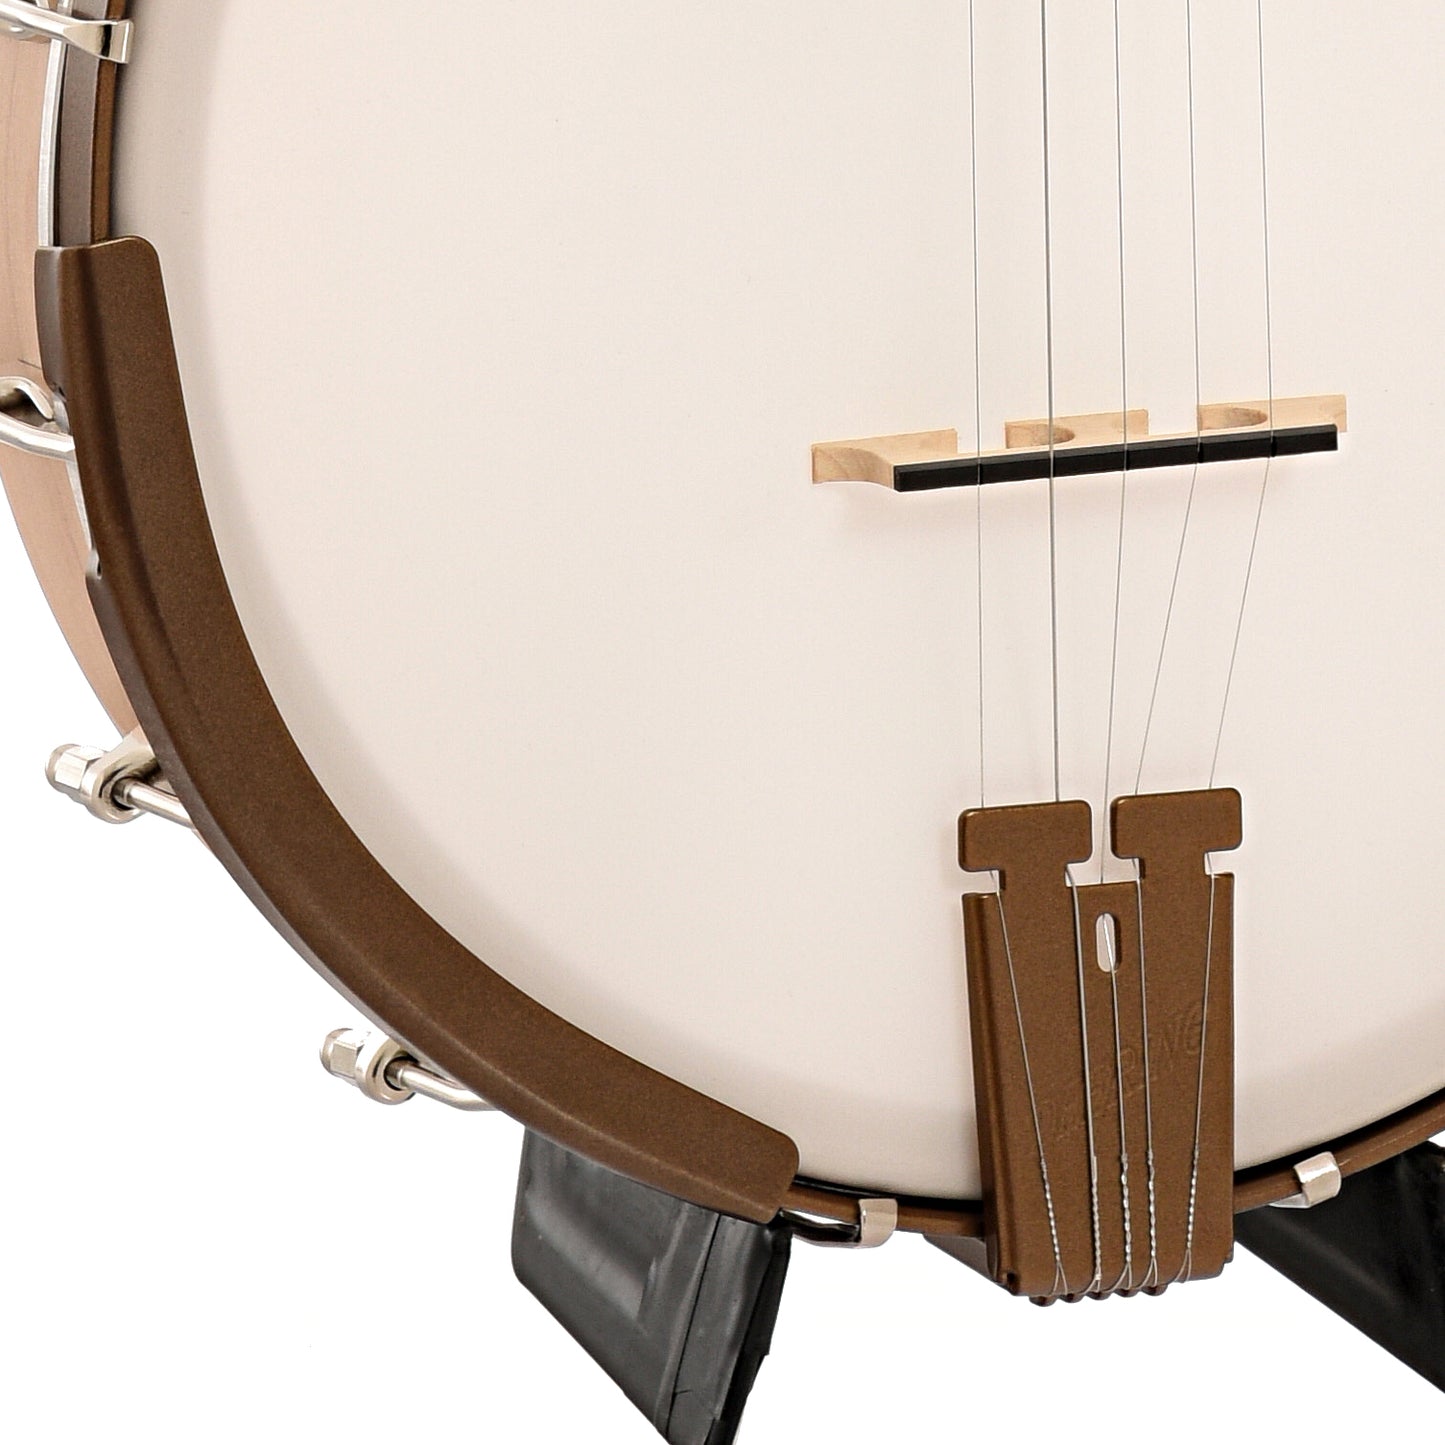 Armrest, bridge and tailpiece of Deering Goodtime Deco Openback Banjo with Scooped Fretboard